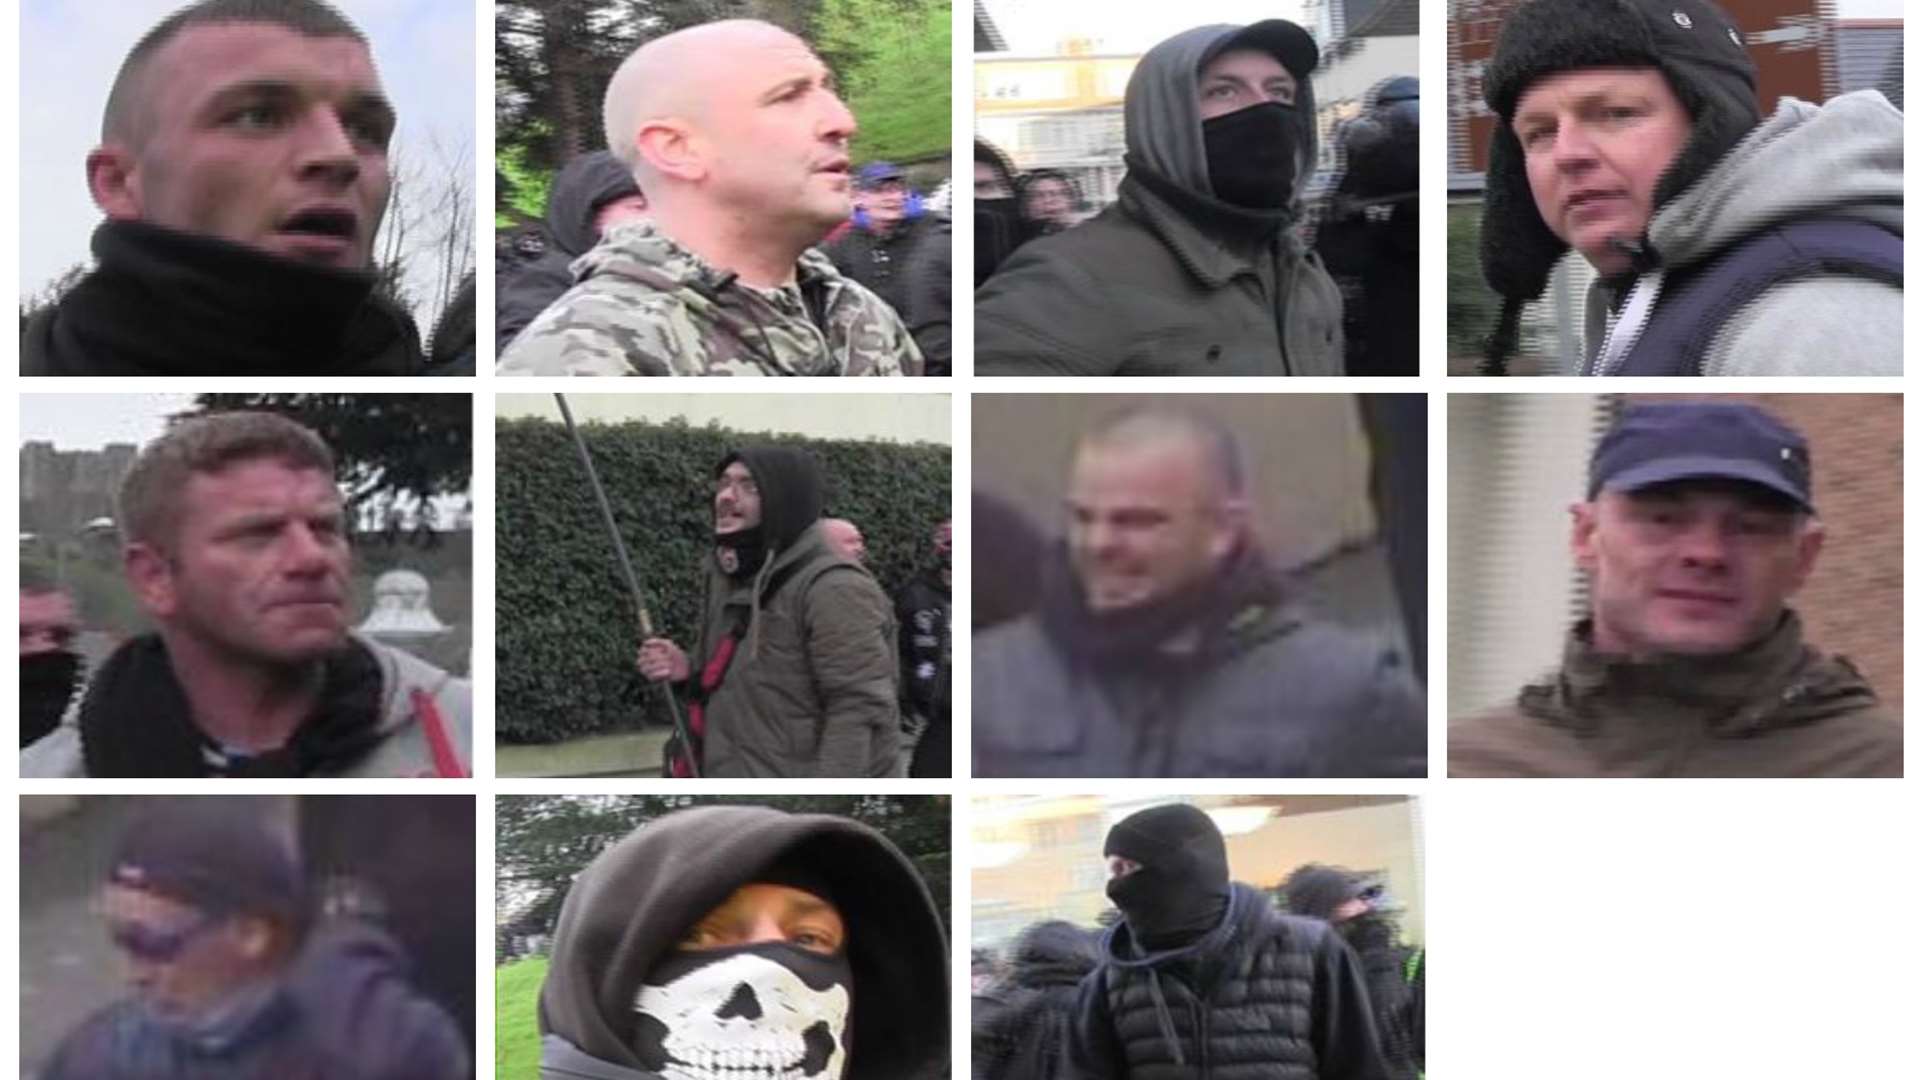 Police are looking to speak to these 11 men after the Dover demonstrations